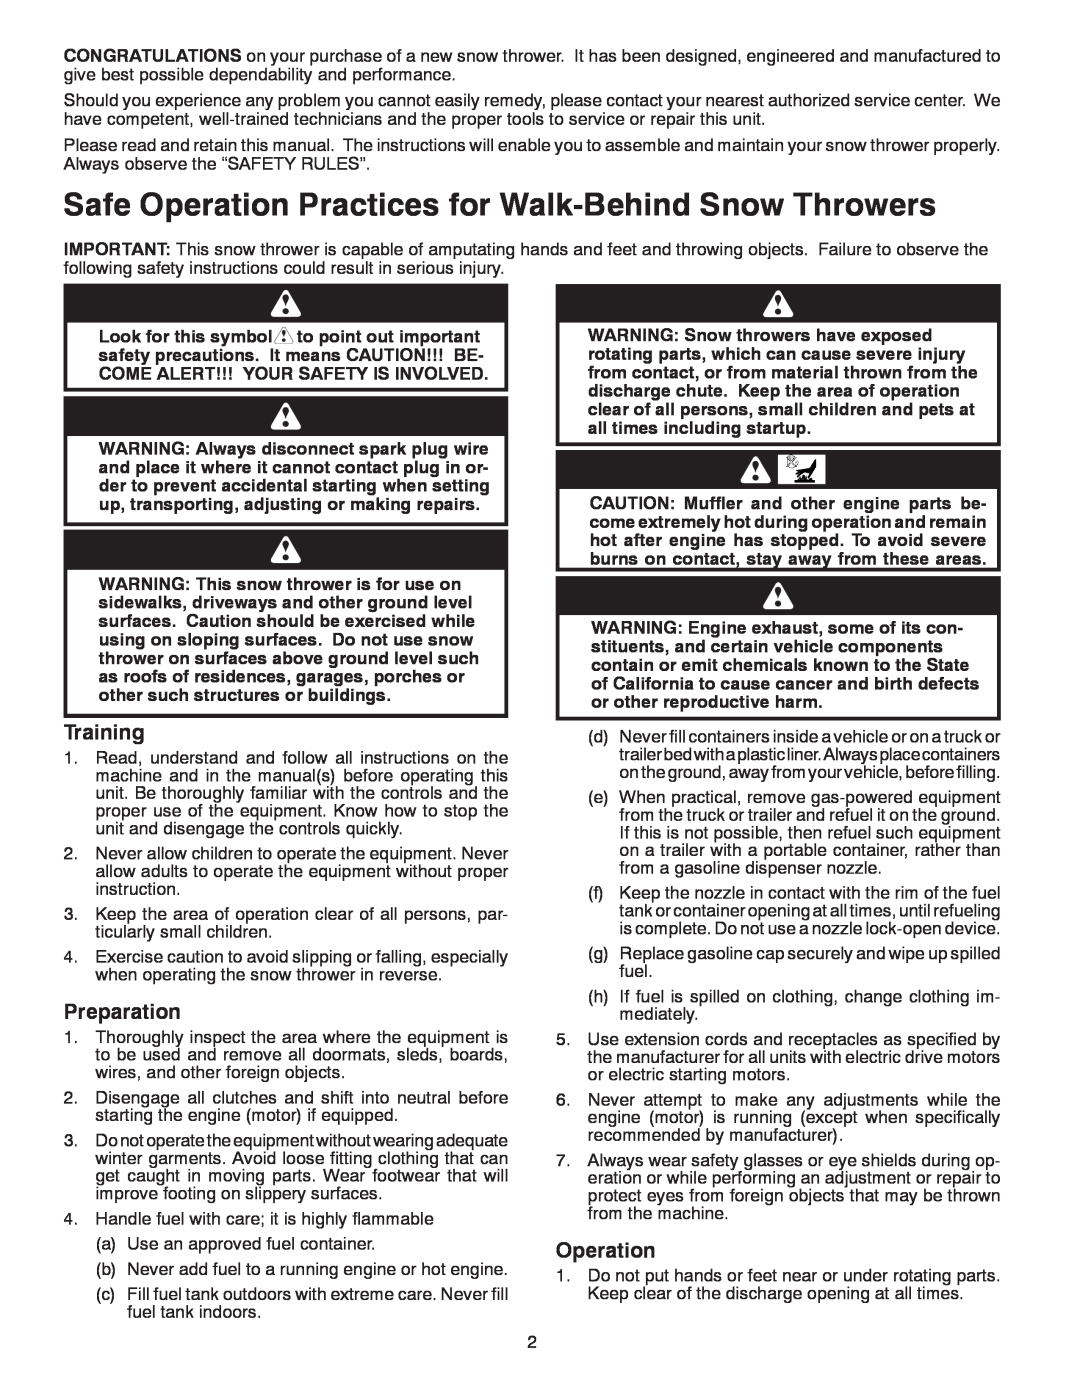 McCulloch 96188000300 owner manual Safe Operation Practices for Walk-Behind Snow Throwers, Training, Preparation 